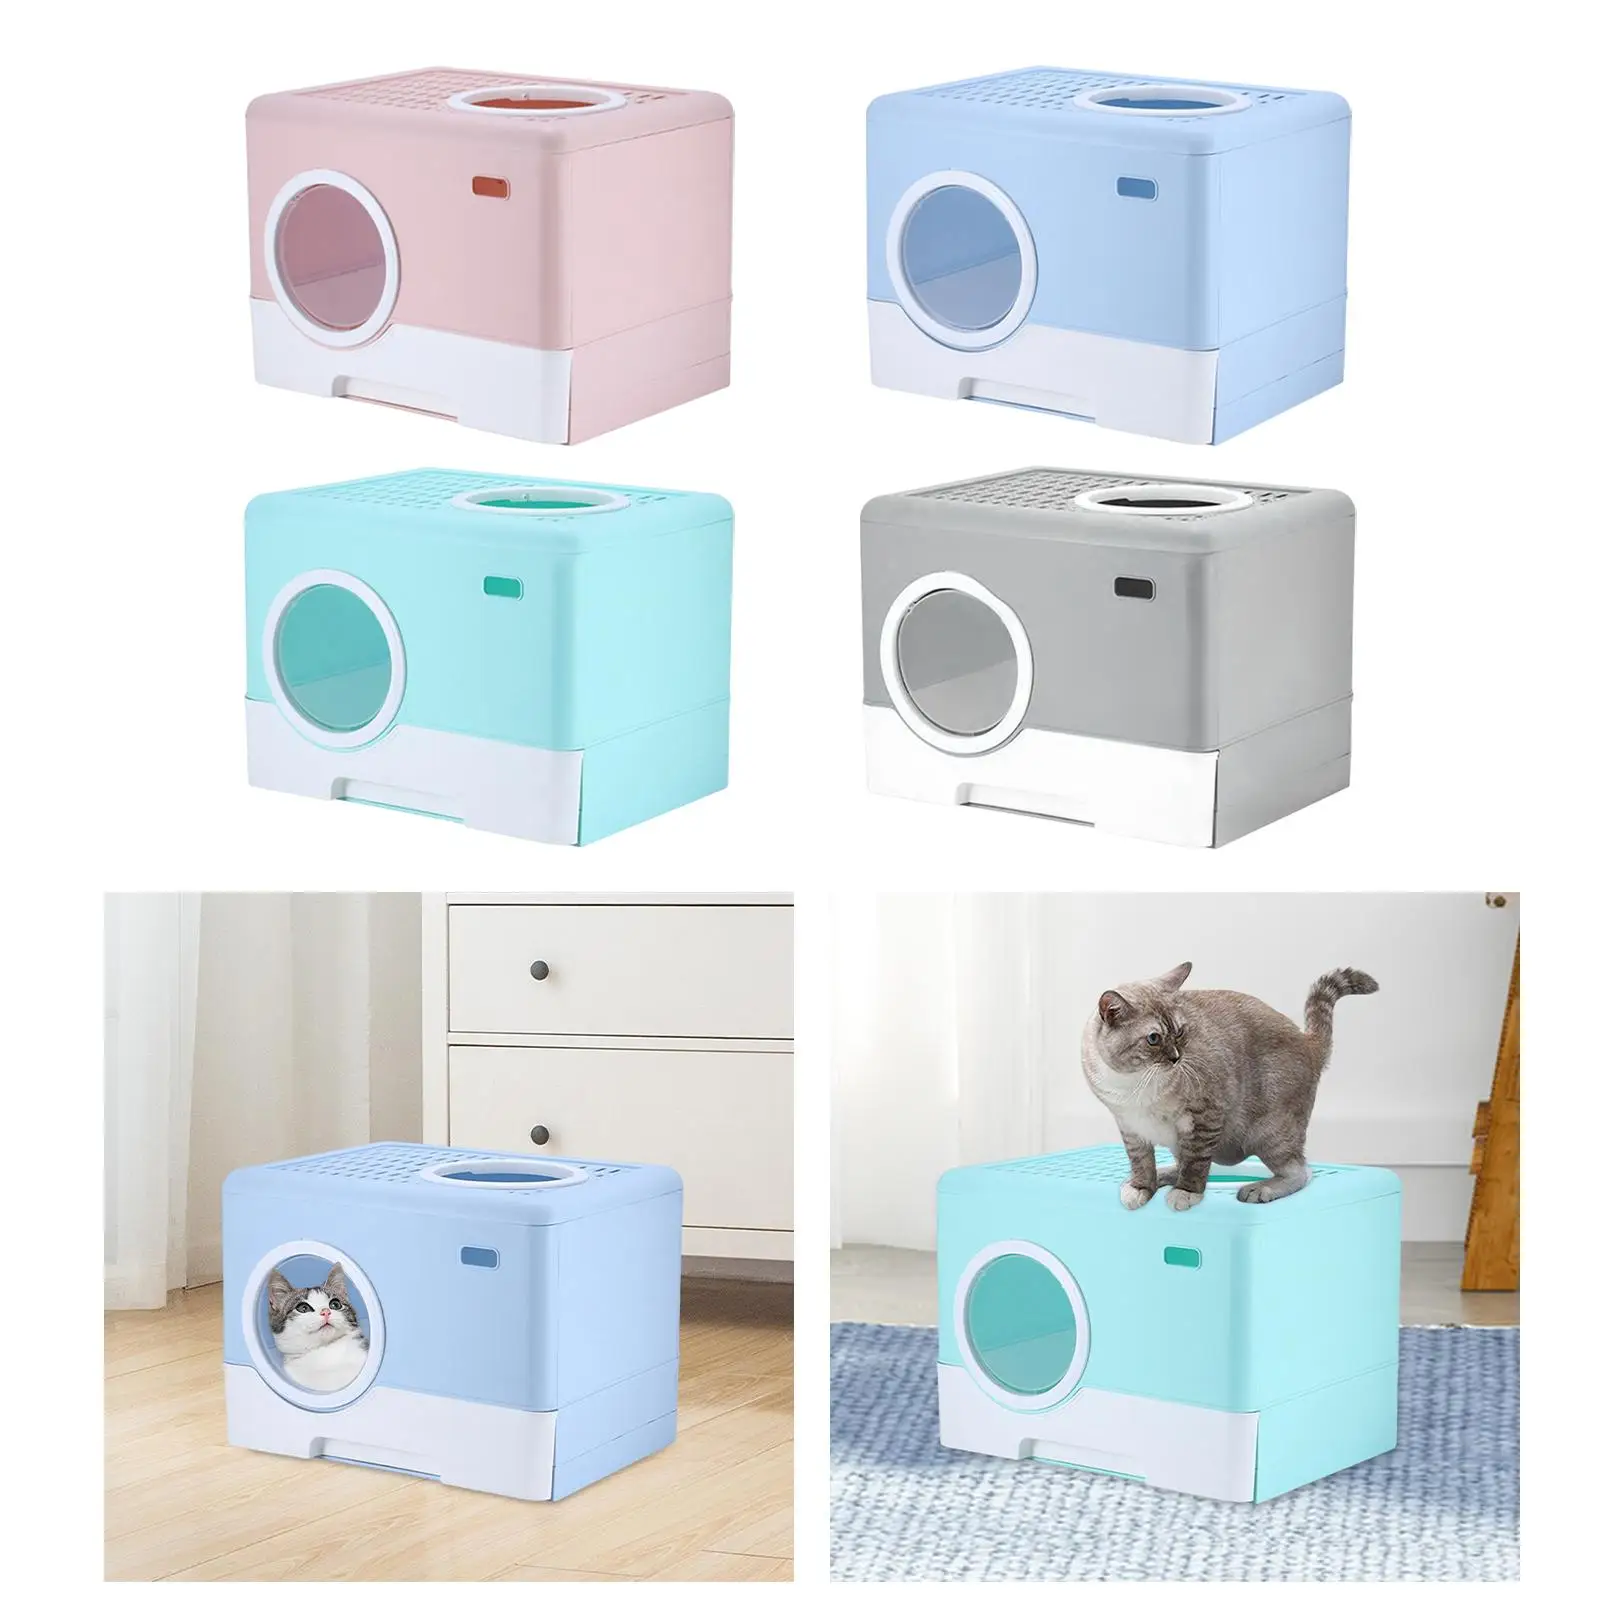 Pet Cat Litter Box Toilet Enclosed Kitten Litter Box for Indoor Portable Large Space Easy Clean Drawer Type Potty Accessories